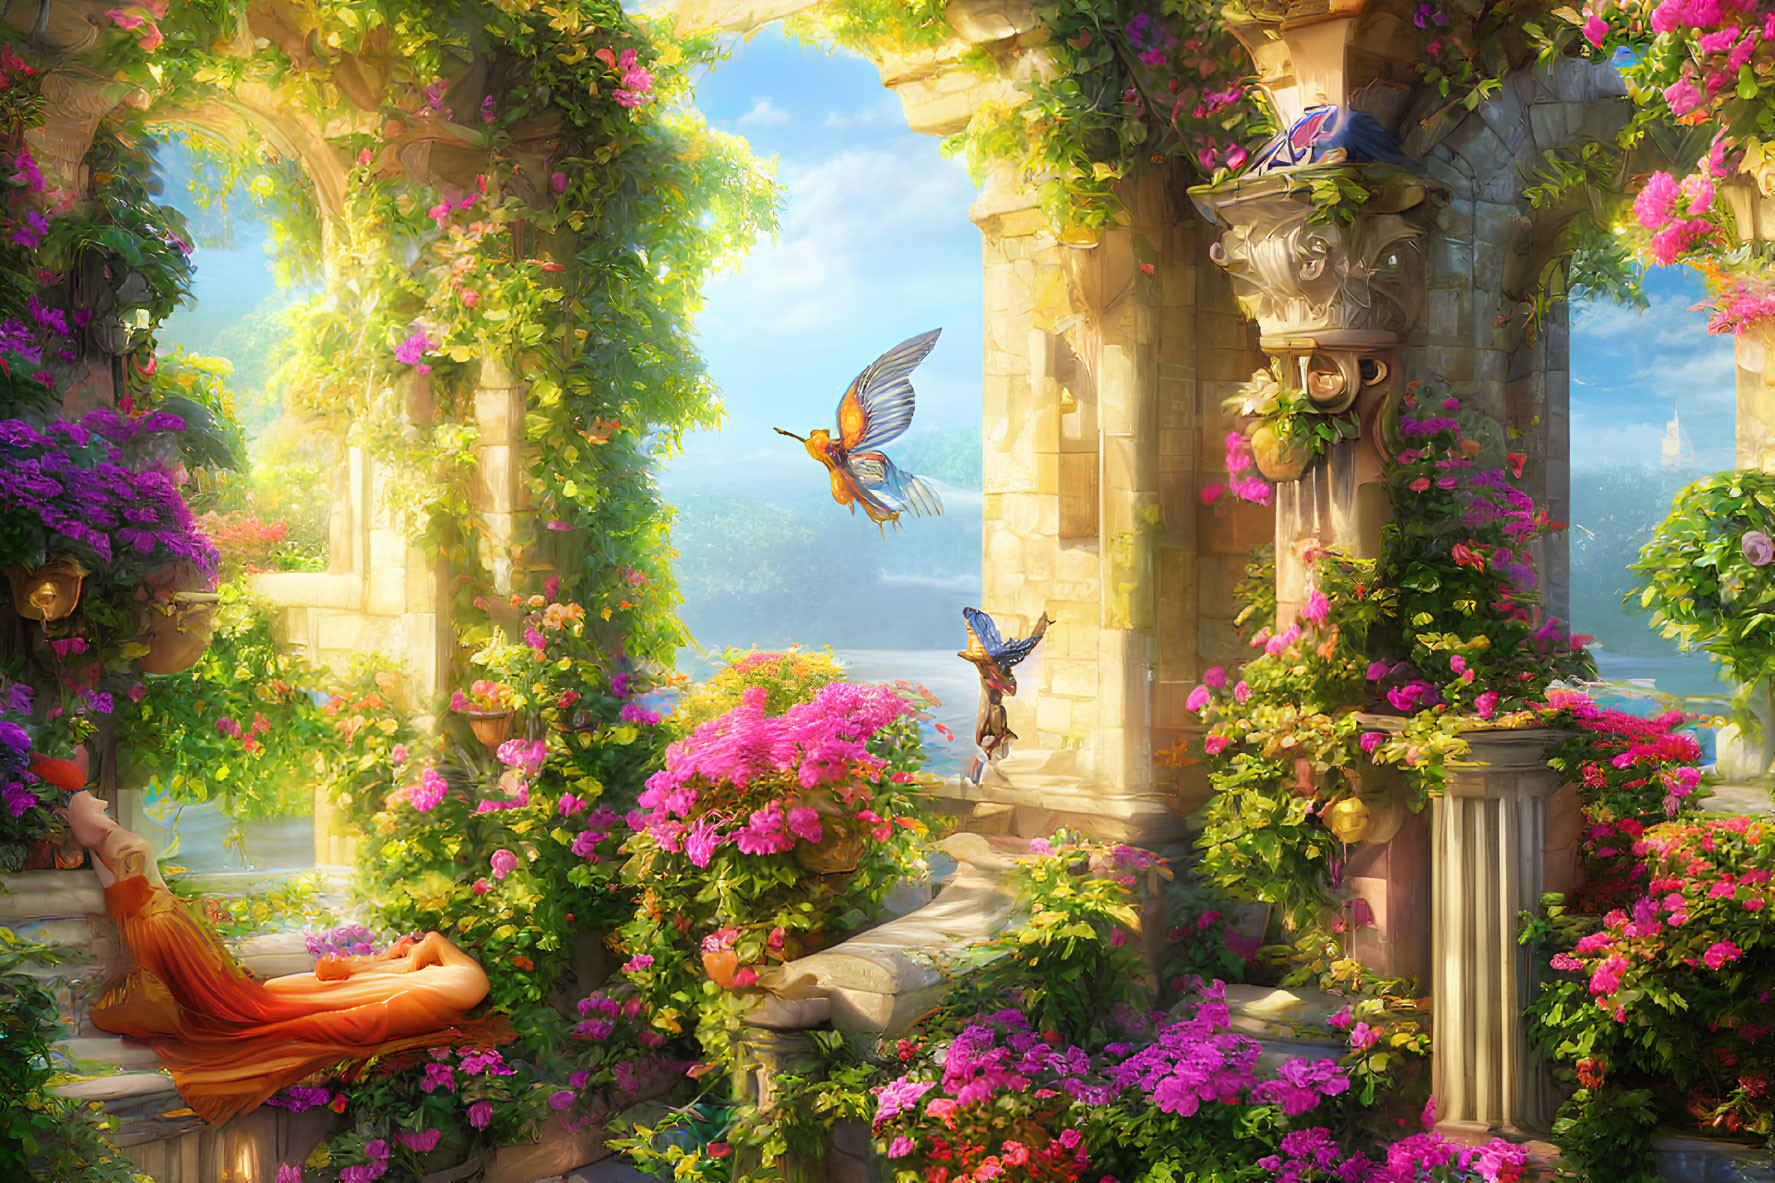 Vibrant fantasy garden with ancient stone arches and colorful birds